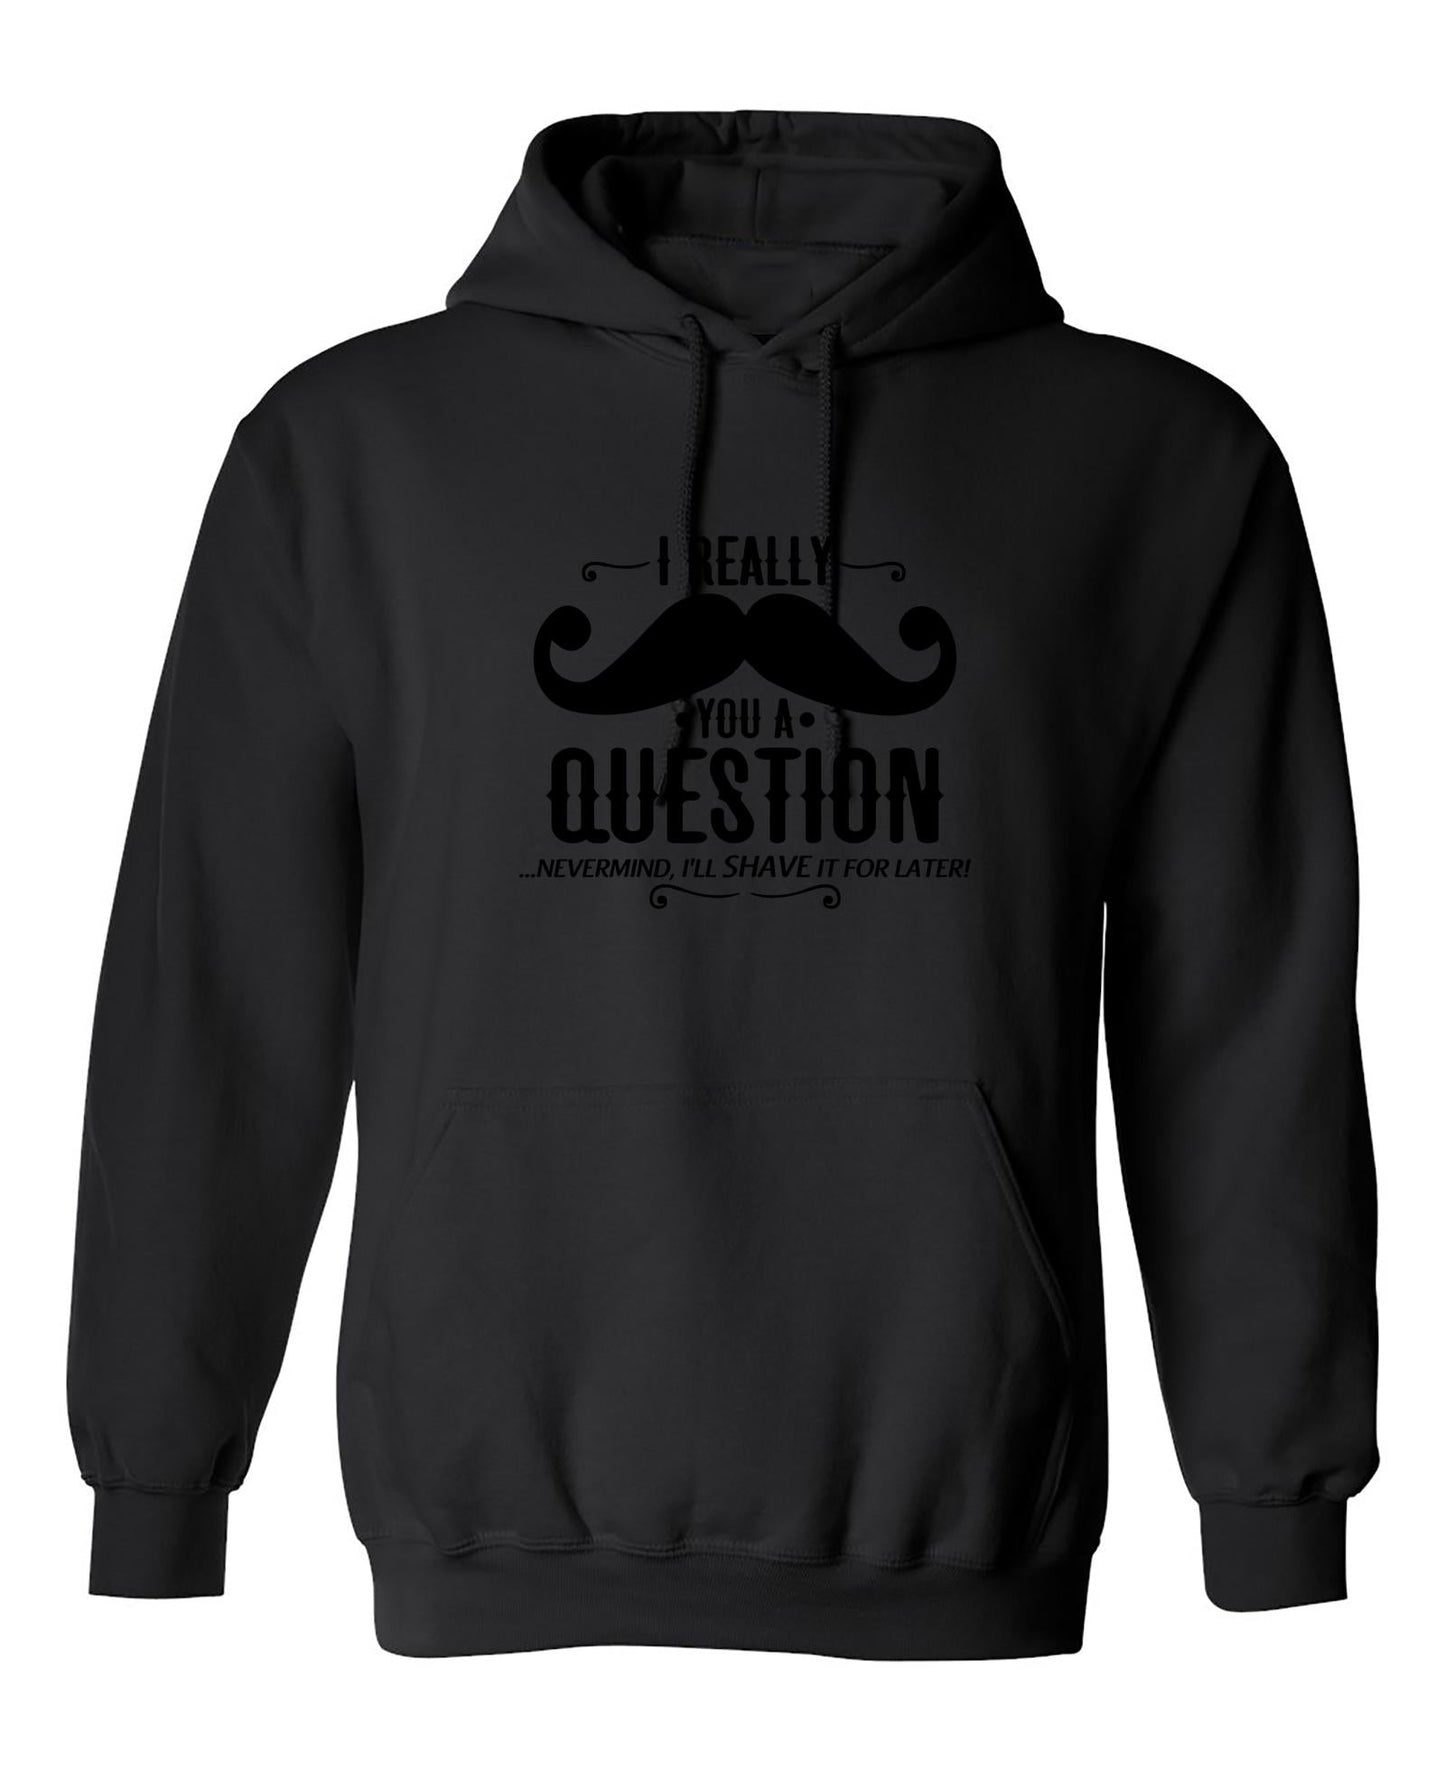 Funny T-Shirts design "I Really Mustache You A Question"